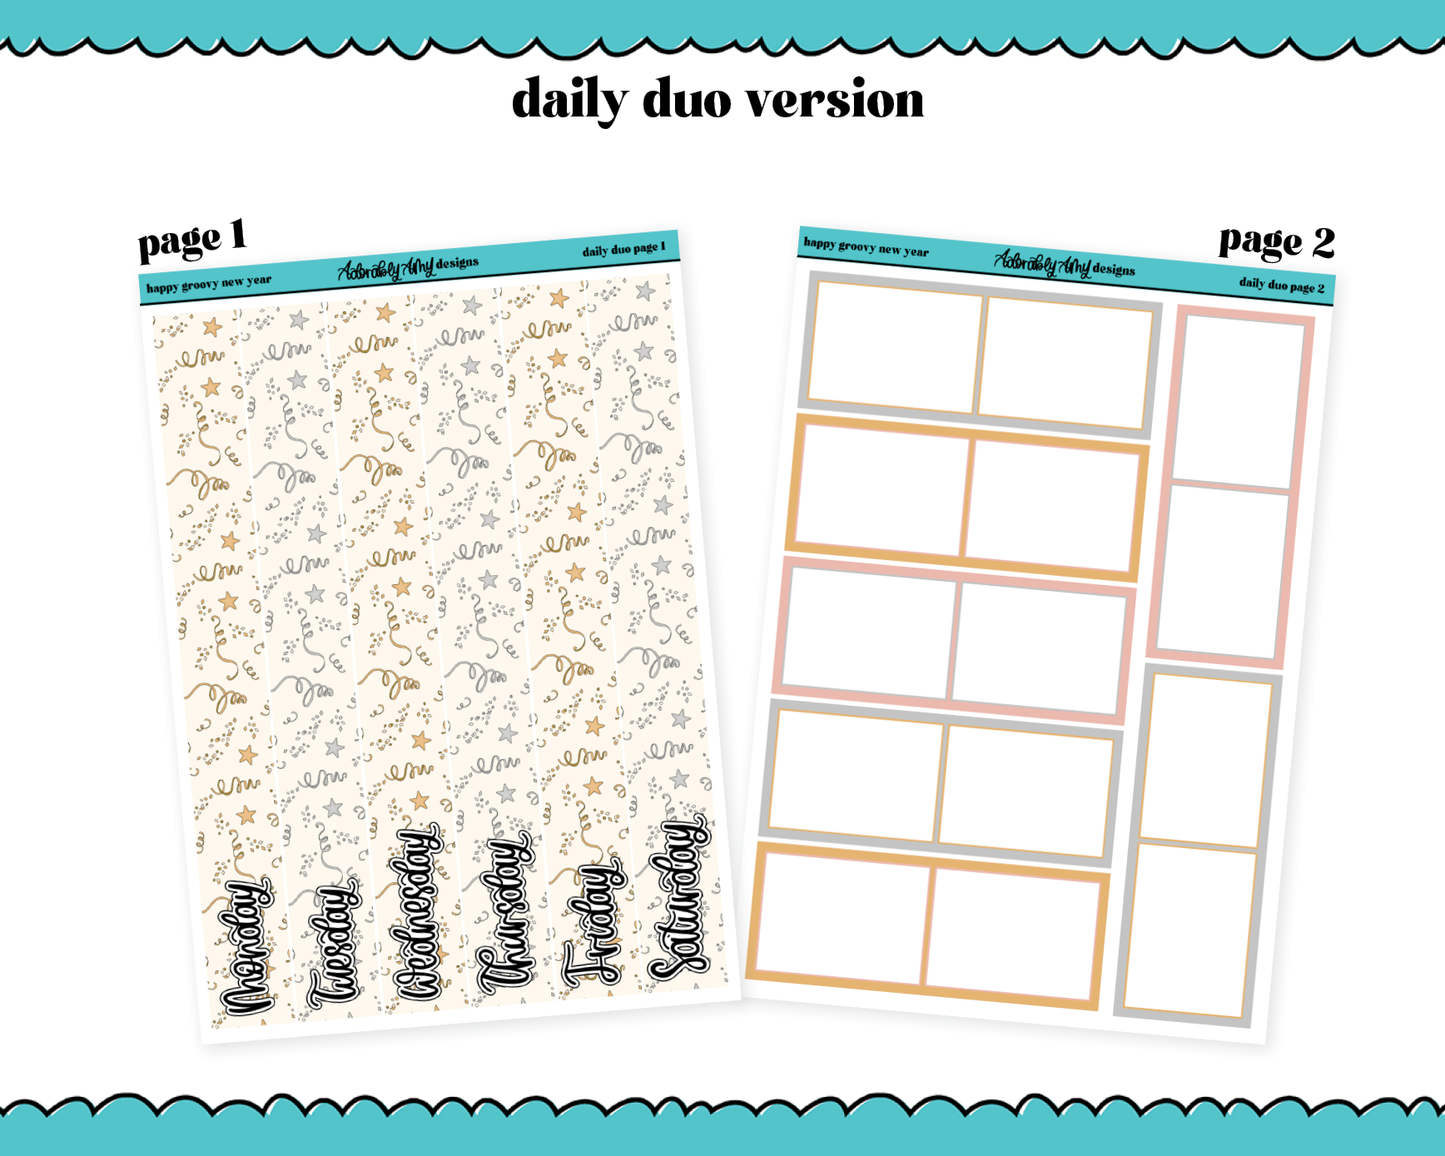 Daily Duo Happy Groovy New Year Weekly Planner Sticker Kit for Daily Duo Planner